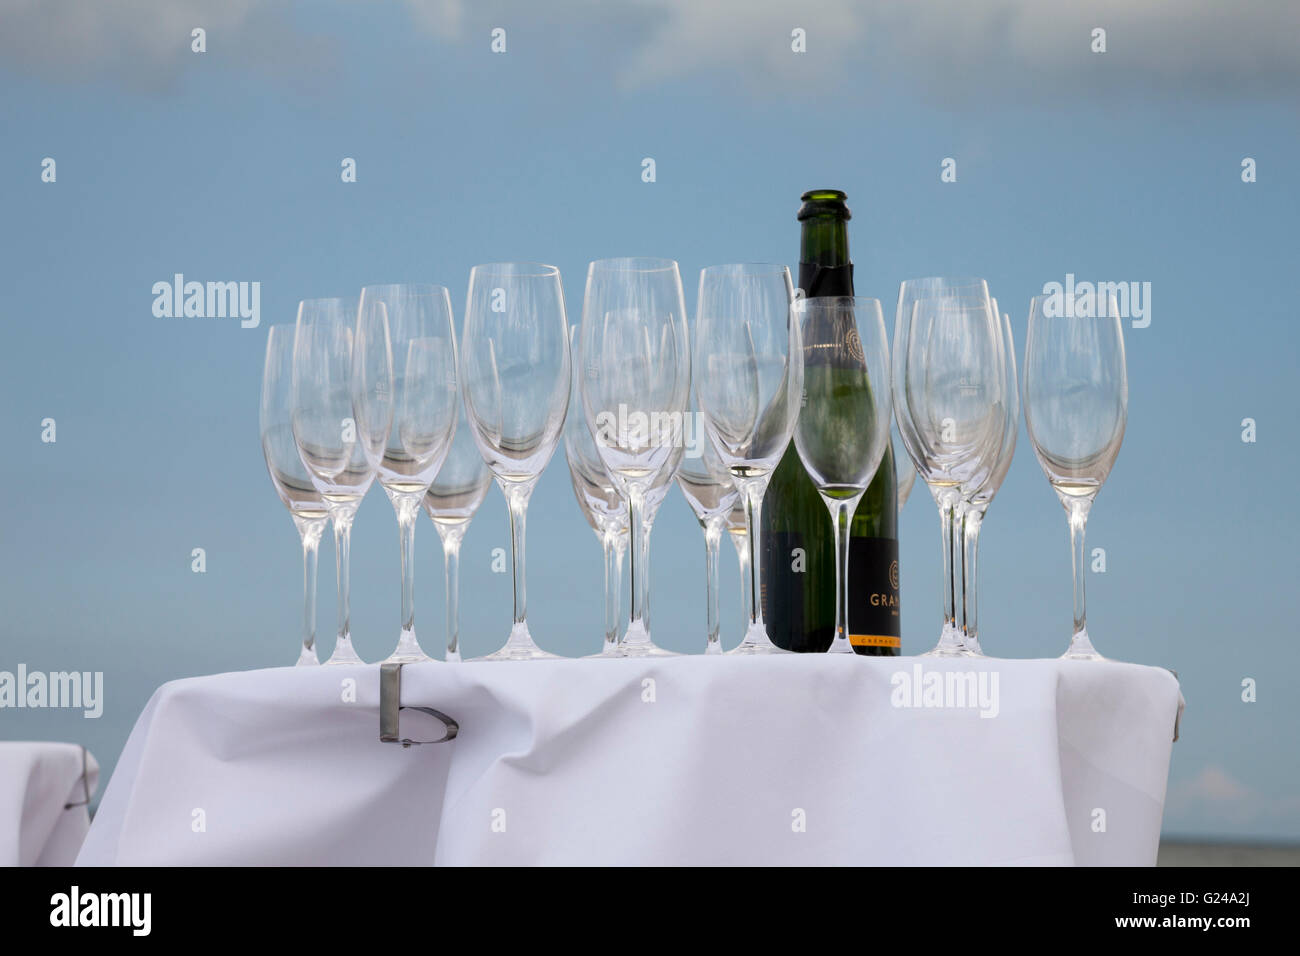 Bar table with champagne glasses and a bottle of champagne, Germany Stock Photo